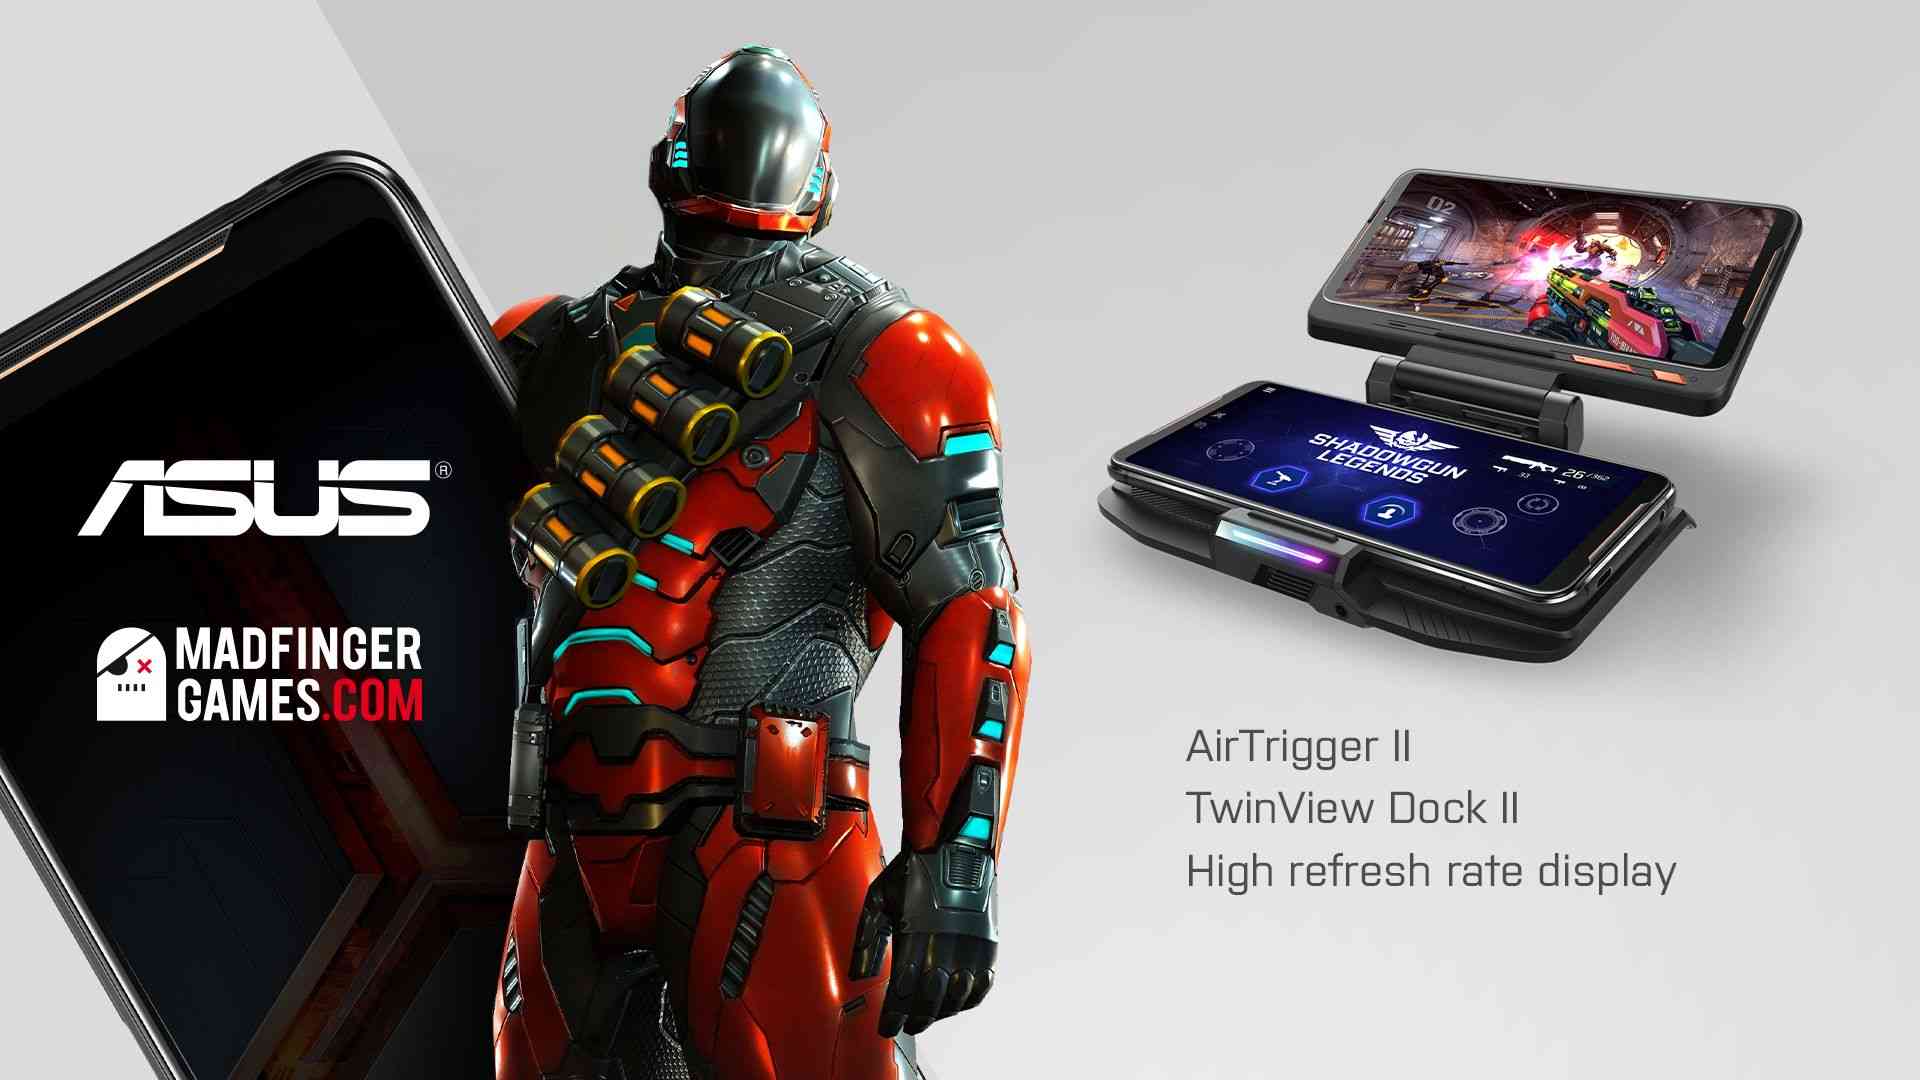 madfinger games join forces with asus for the rog phone ii launch 3031 big 1